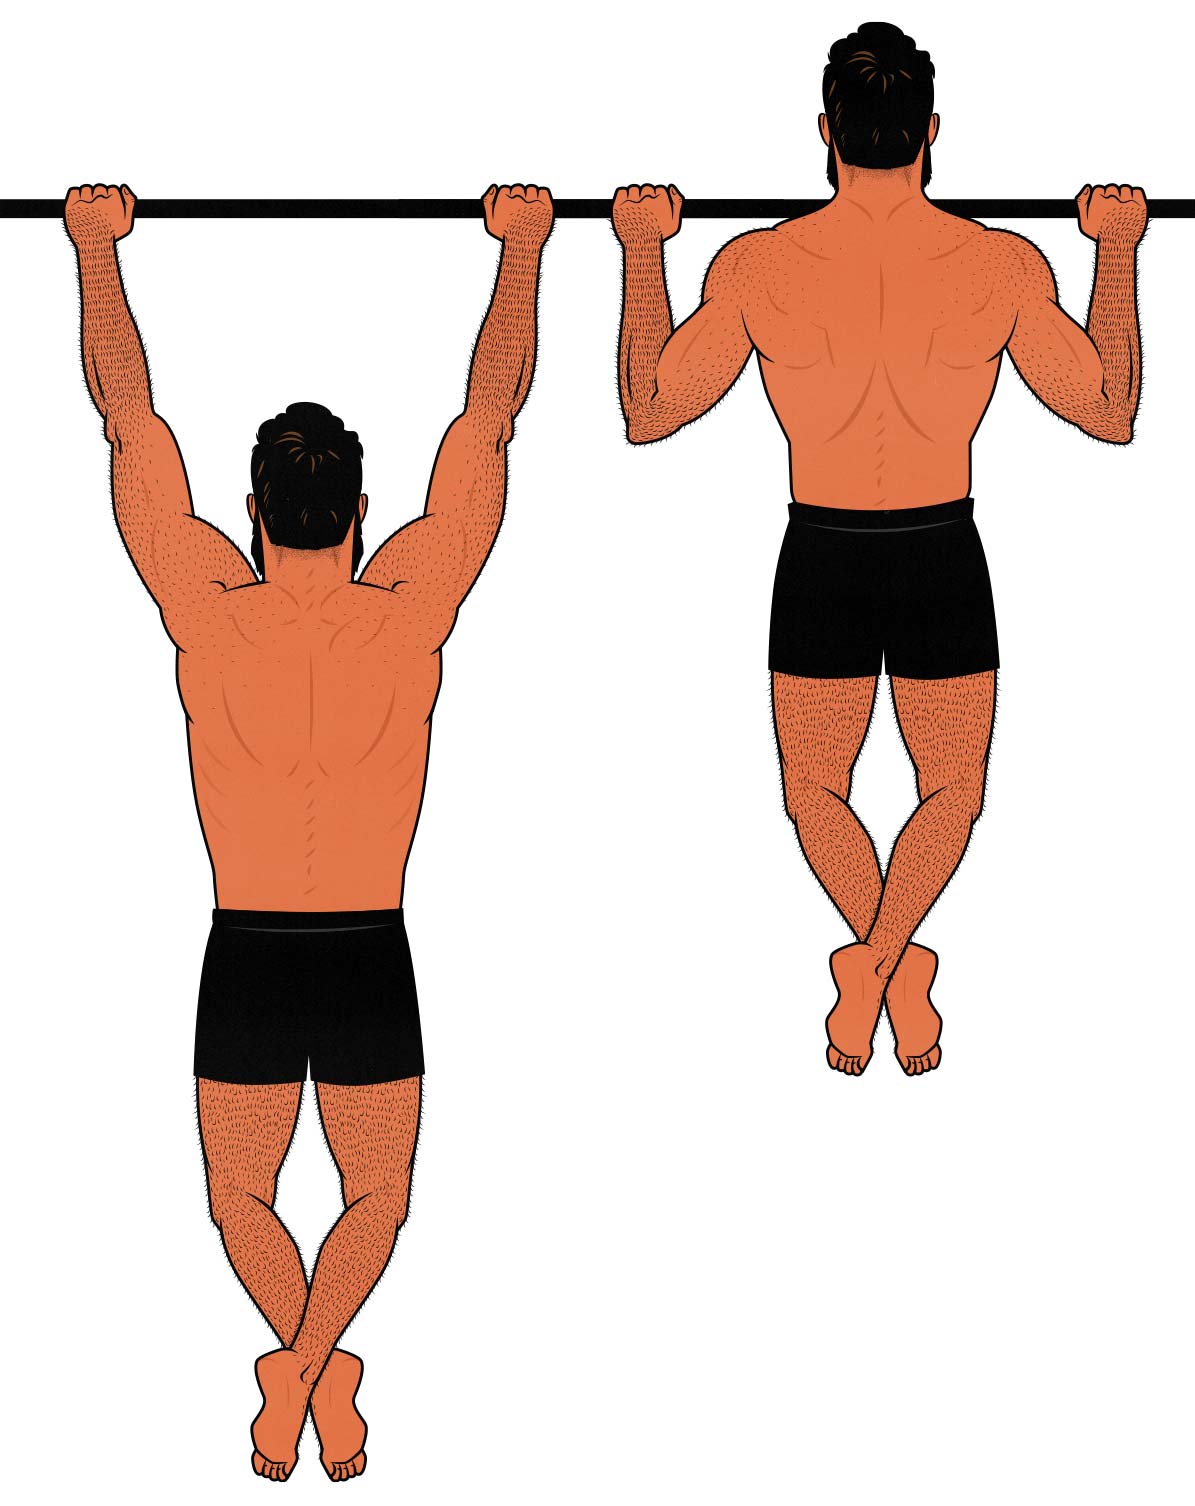 Illustration of a weight lifter doing pull-ups on Pull Day of a 6-day workout split.